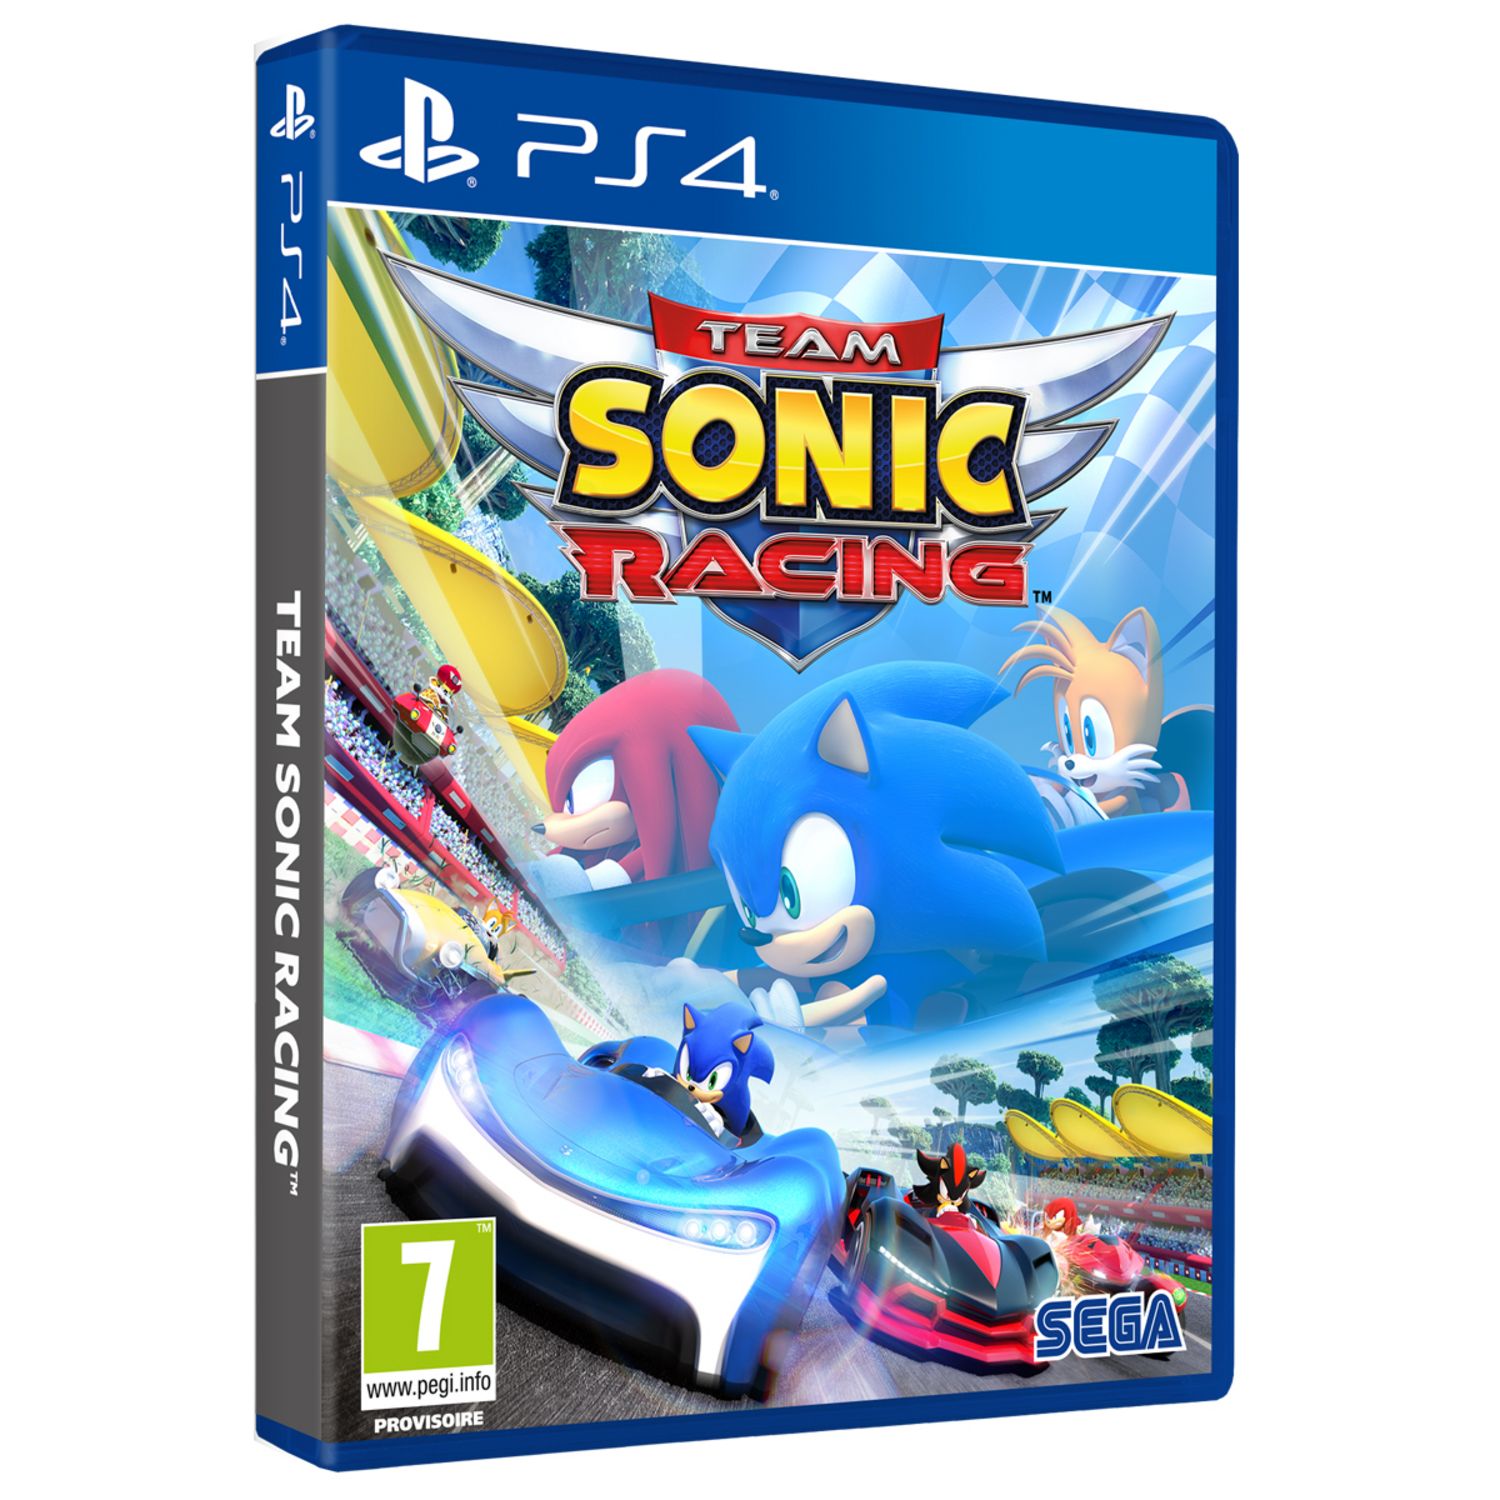 Team Sonic Racing - PS4 - Achat jeux video Maroc 